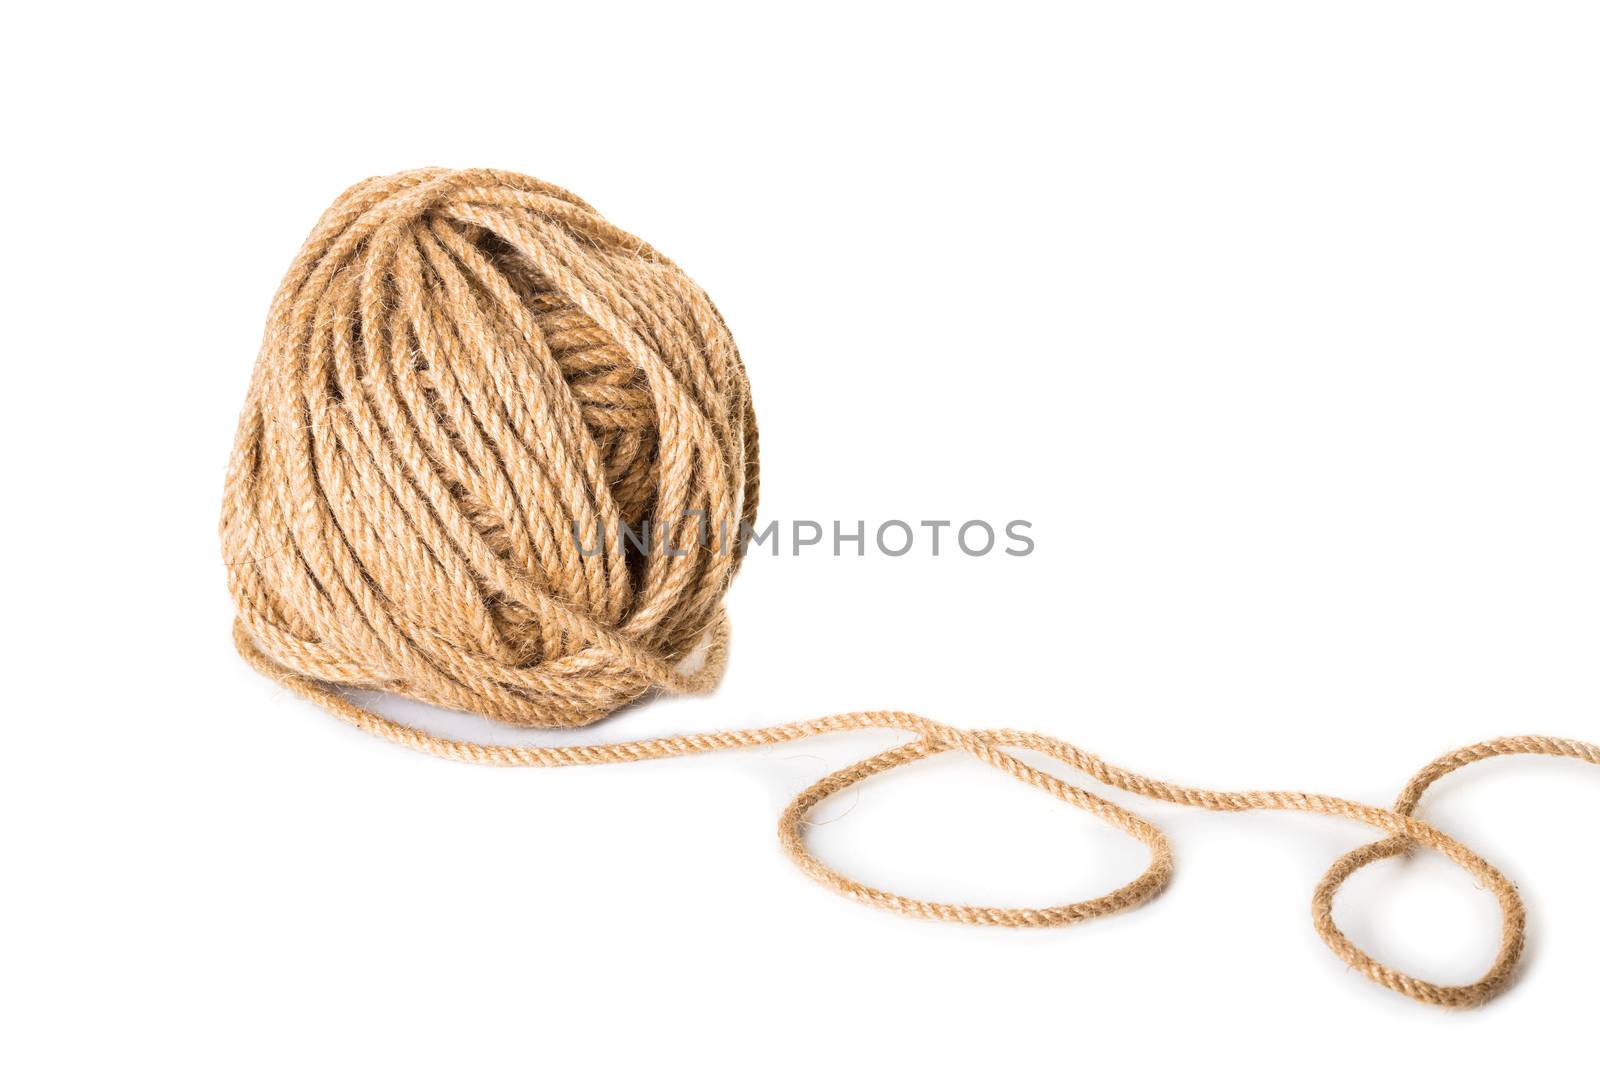  tangle of rope on a white isolated background